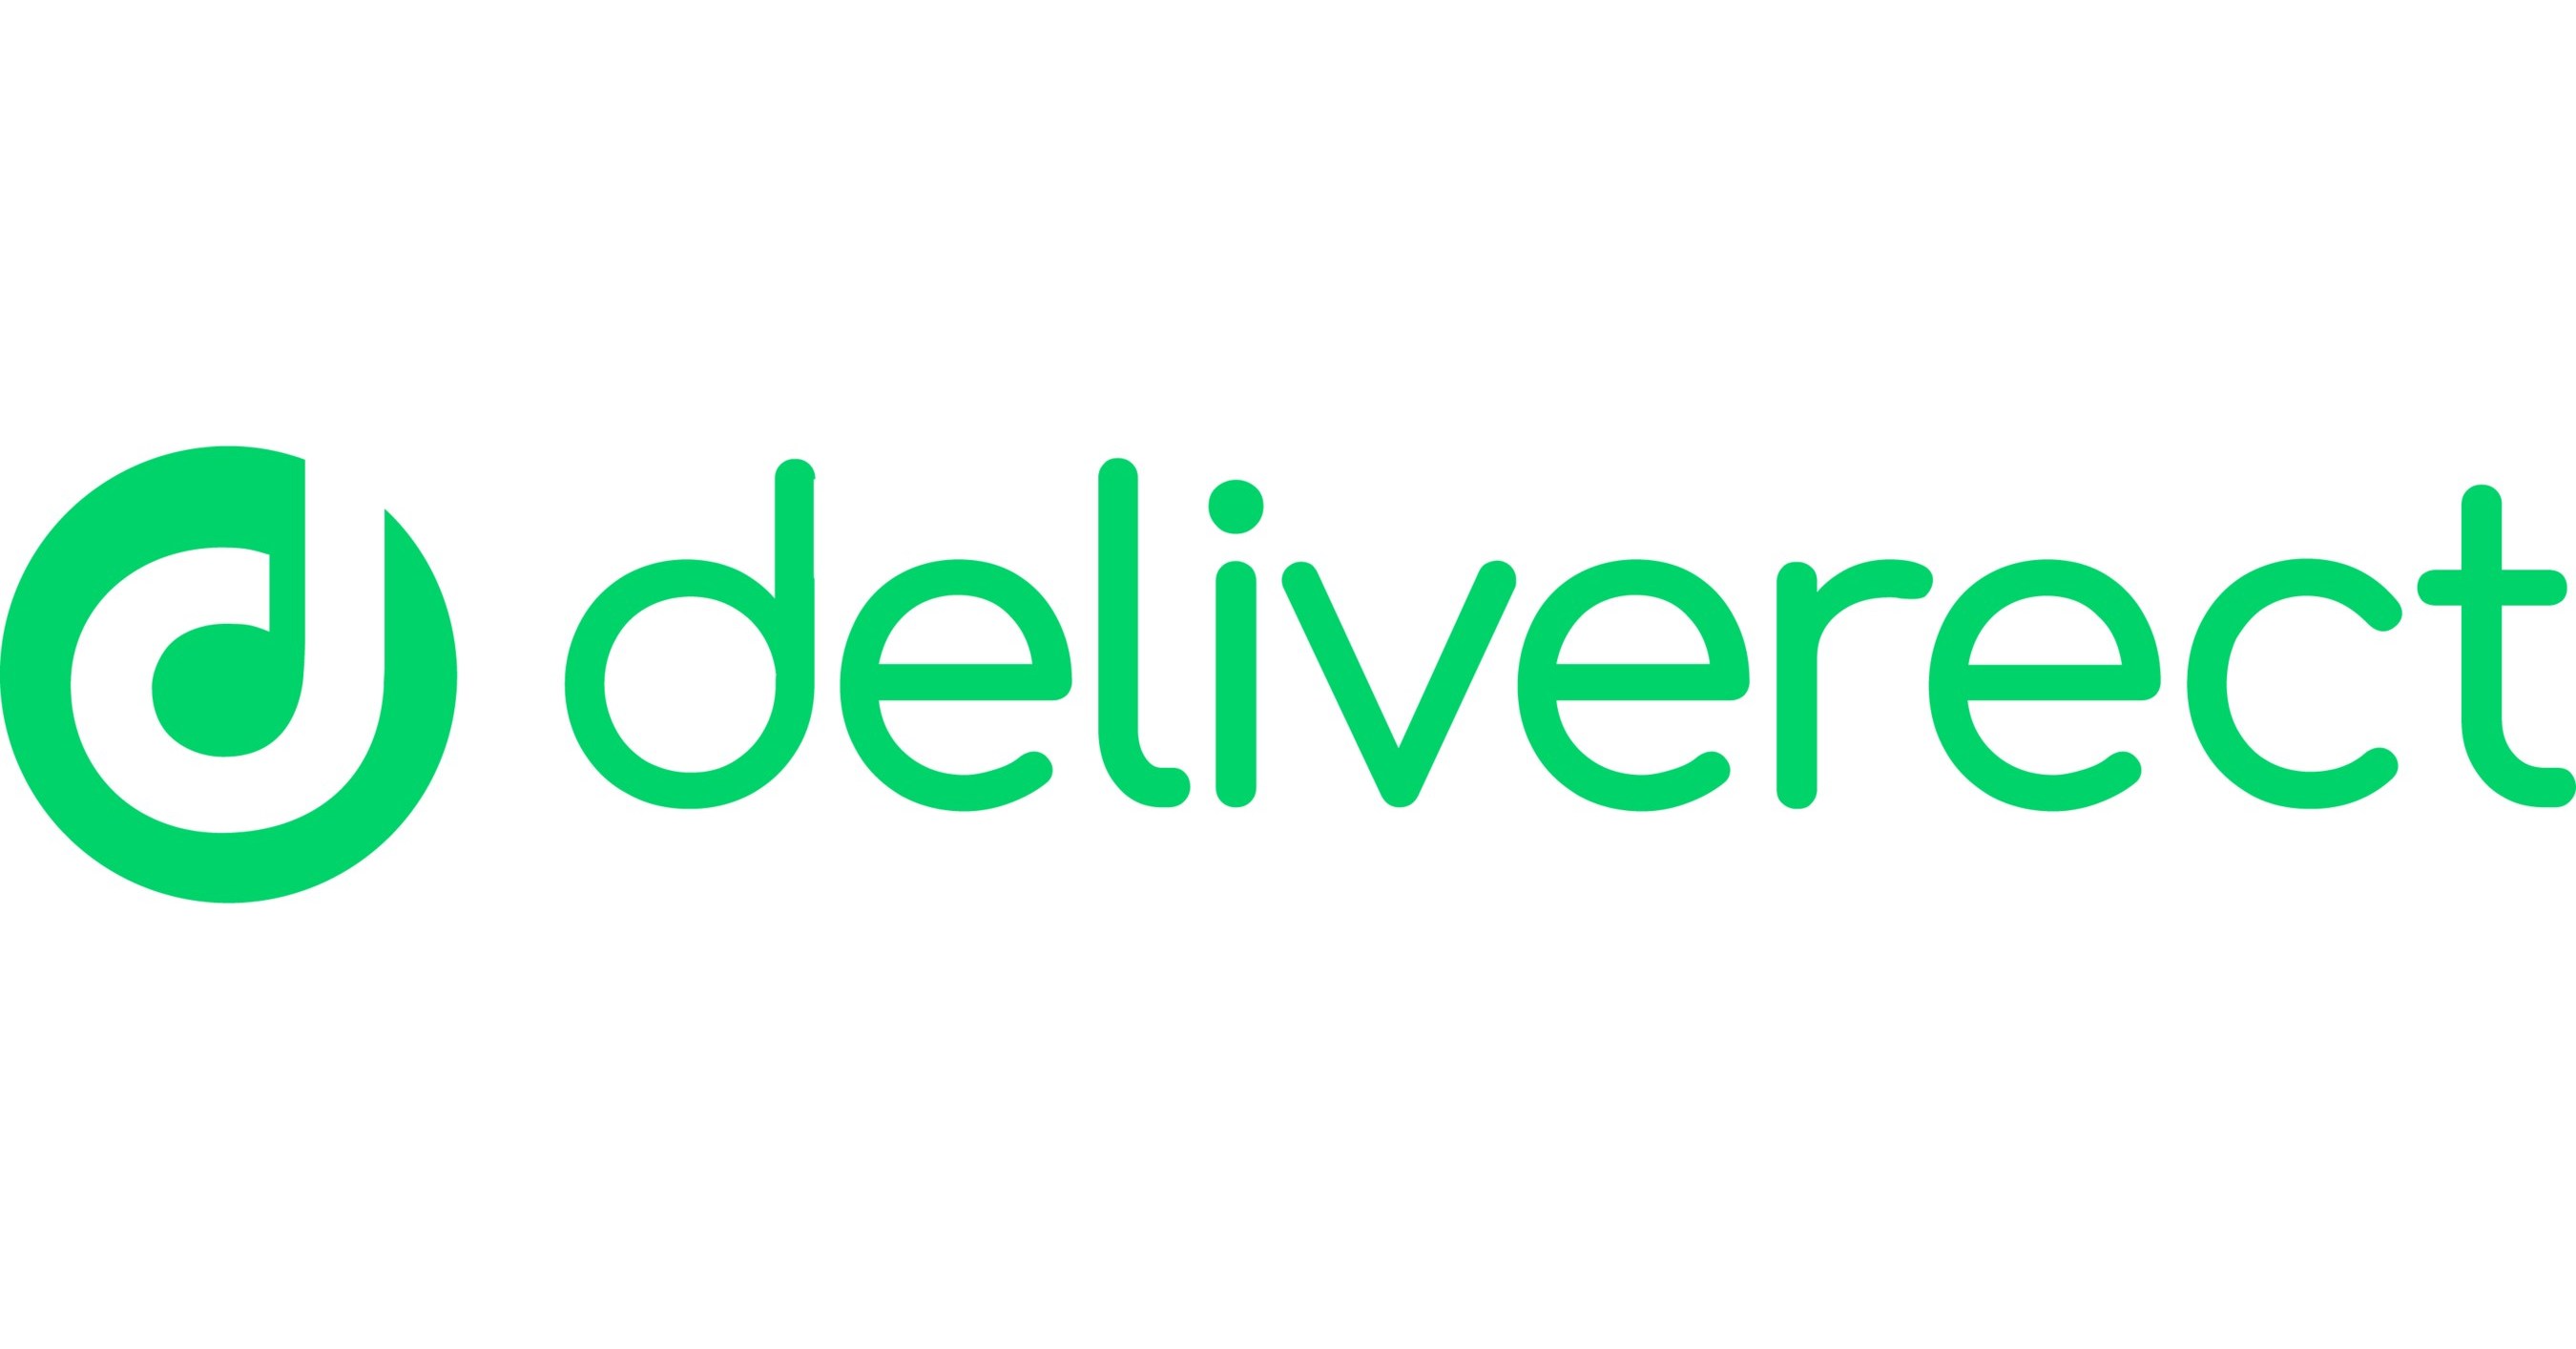 Deliverect raises $65 million as it surpasses 30 million orders processed  in the last year, equating to more than $1bn estimated order value